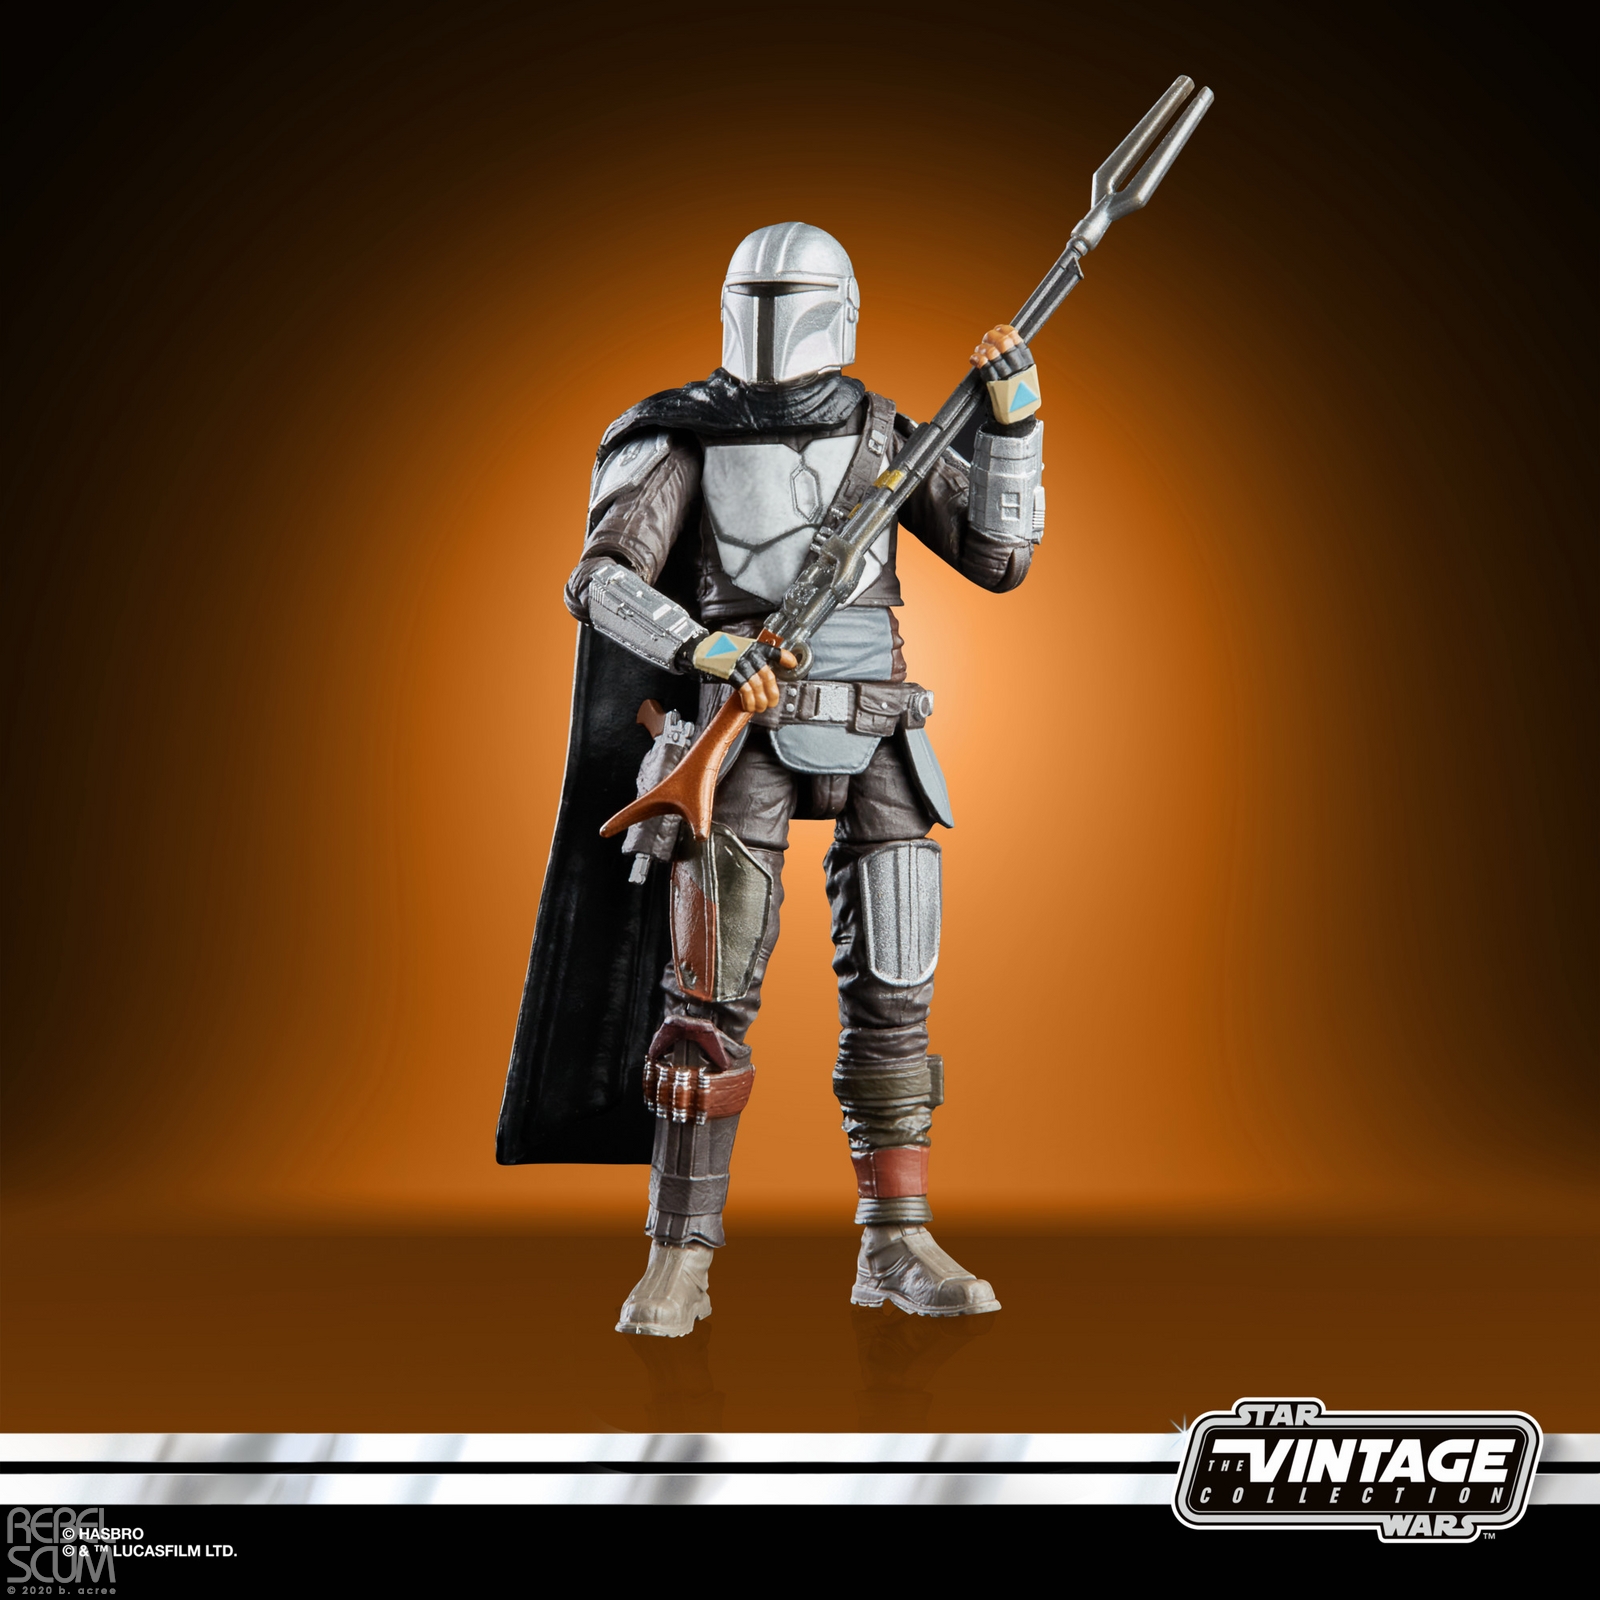 STAR WARS THE VINTAGE COLLECTION 3.75-INCH THE MANDALORIAN - oop (2).jpg